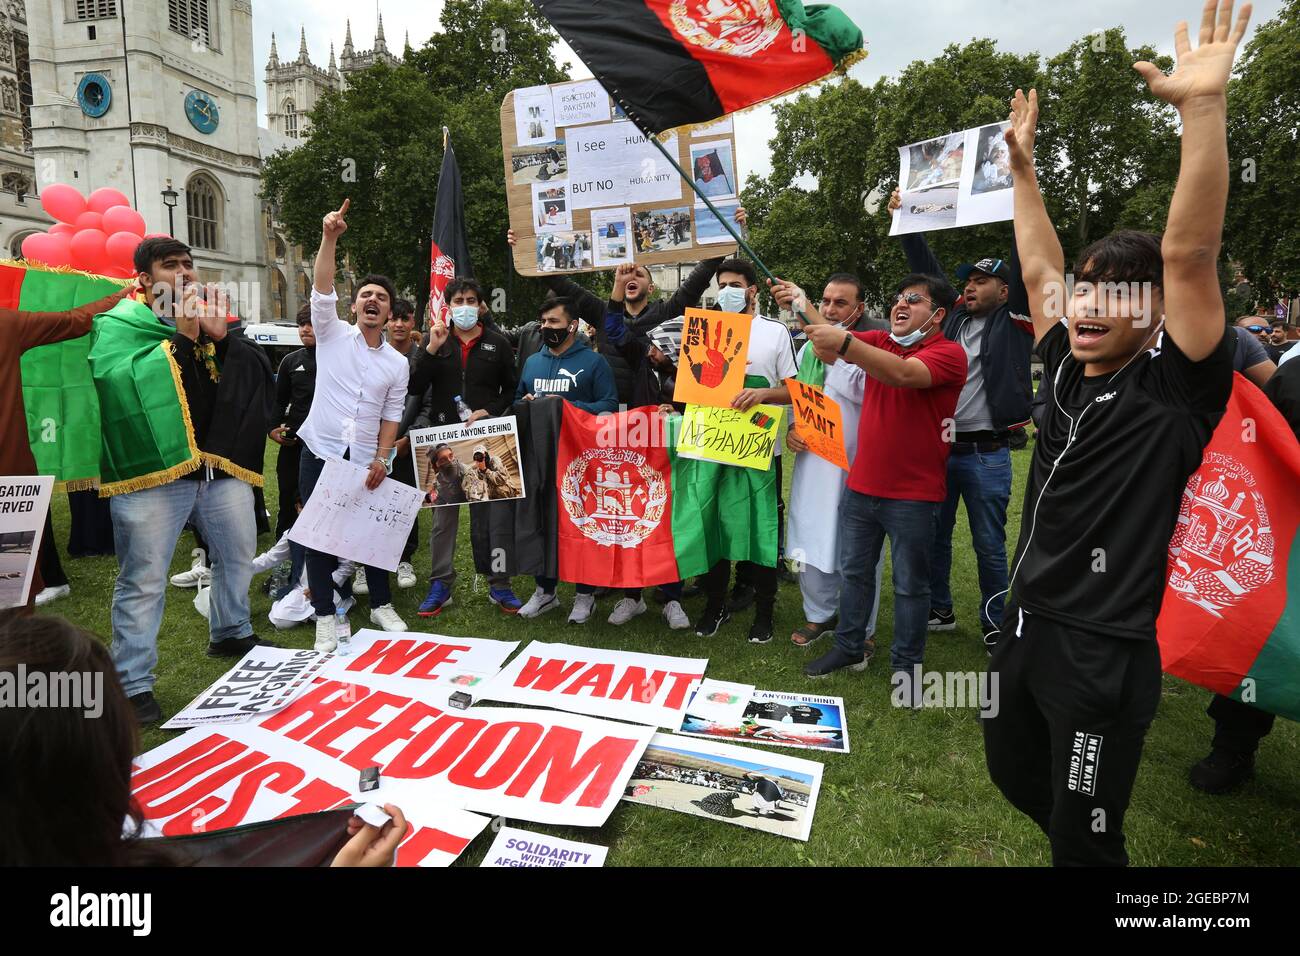 London, UK. 18th Aug, 2021. Protesters shouting slogans as they gesture during the demonstration.Protesters including former interpreters for the British Army gathered in Parliament Square to protest Taliban's takeover of Afghanistan. Politicians returned to Parliament for the day to debate the situation in the country announcing the offer for an initial 5000 places for Afghans fleeing the Taliban in the first year. (Photo by Martin Pope/SOPA Images/Sipa USA) Credit: Sipa USA/Alamy Live News Stock Photo